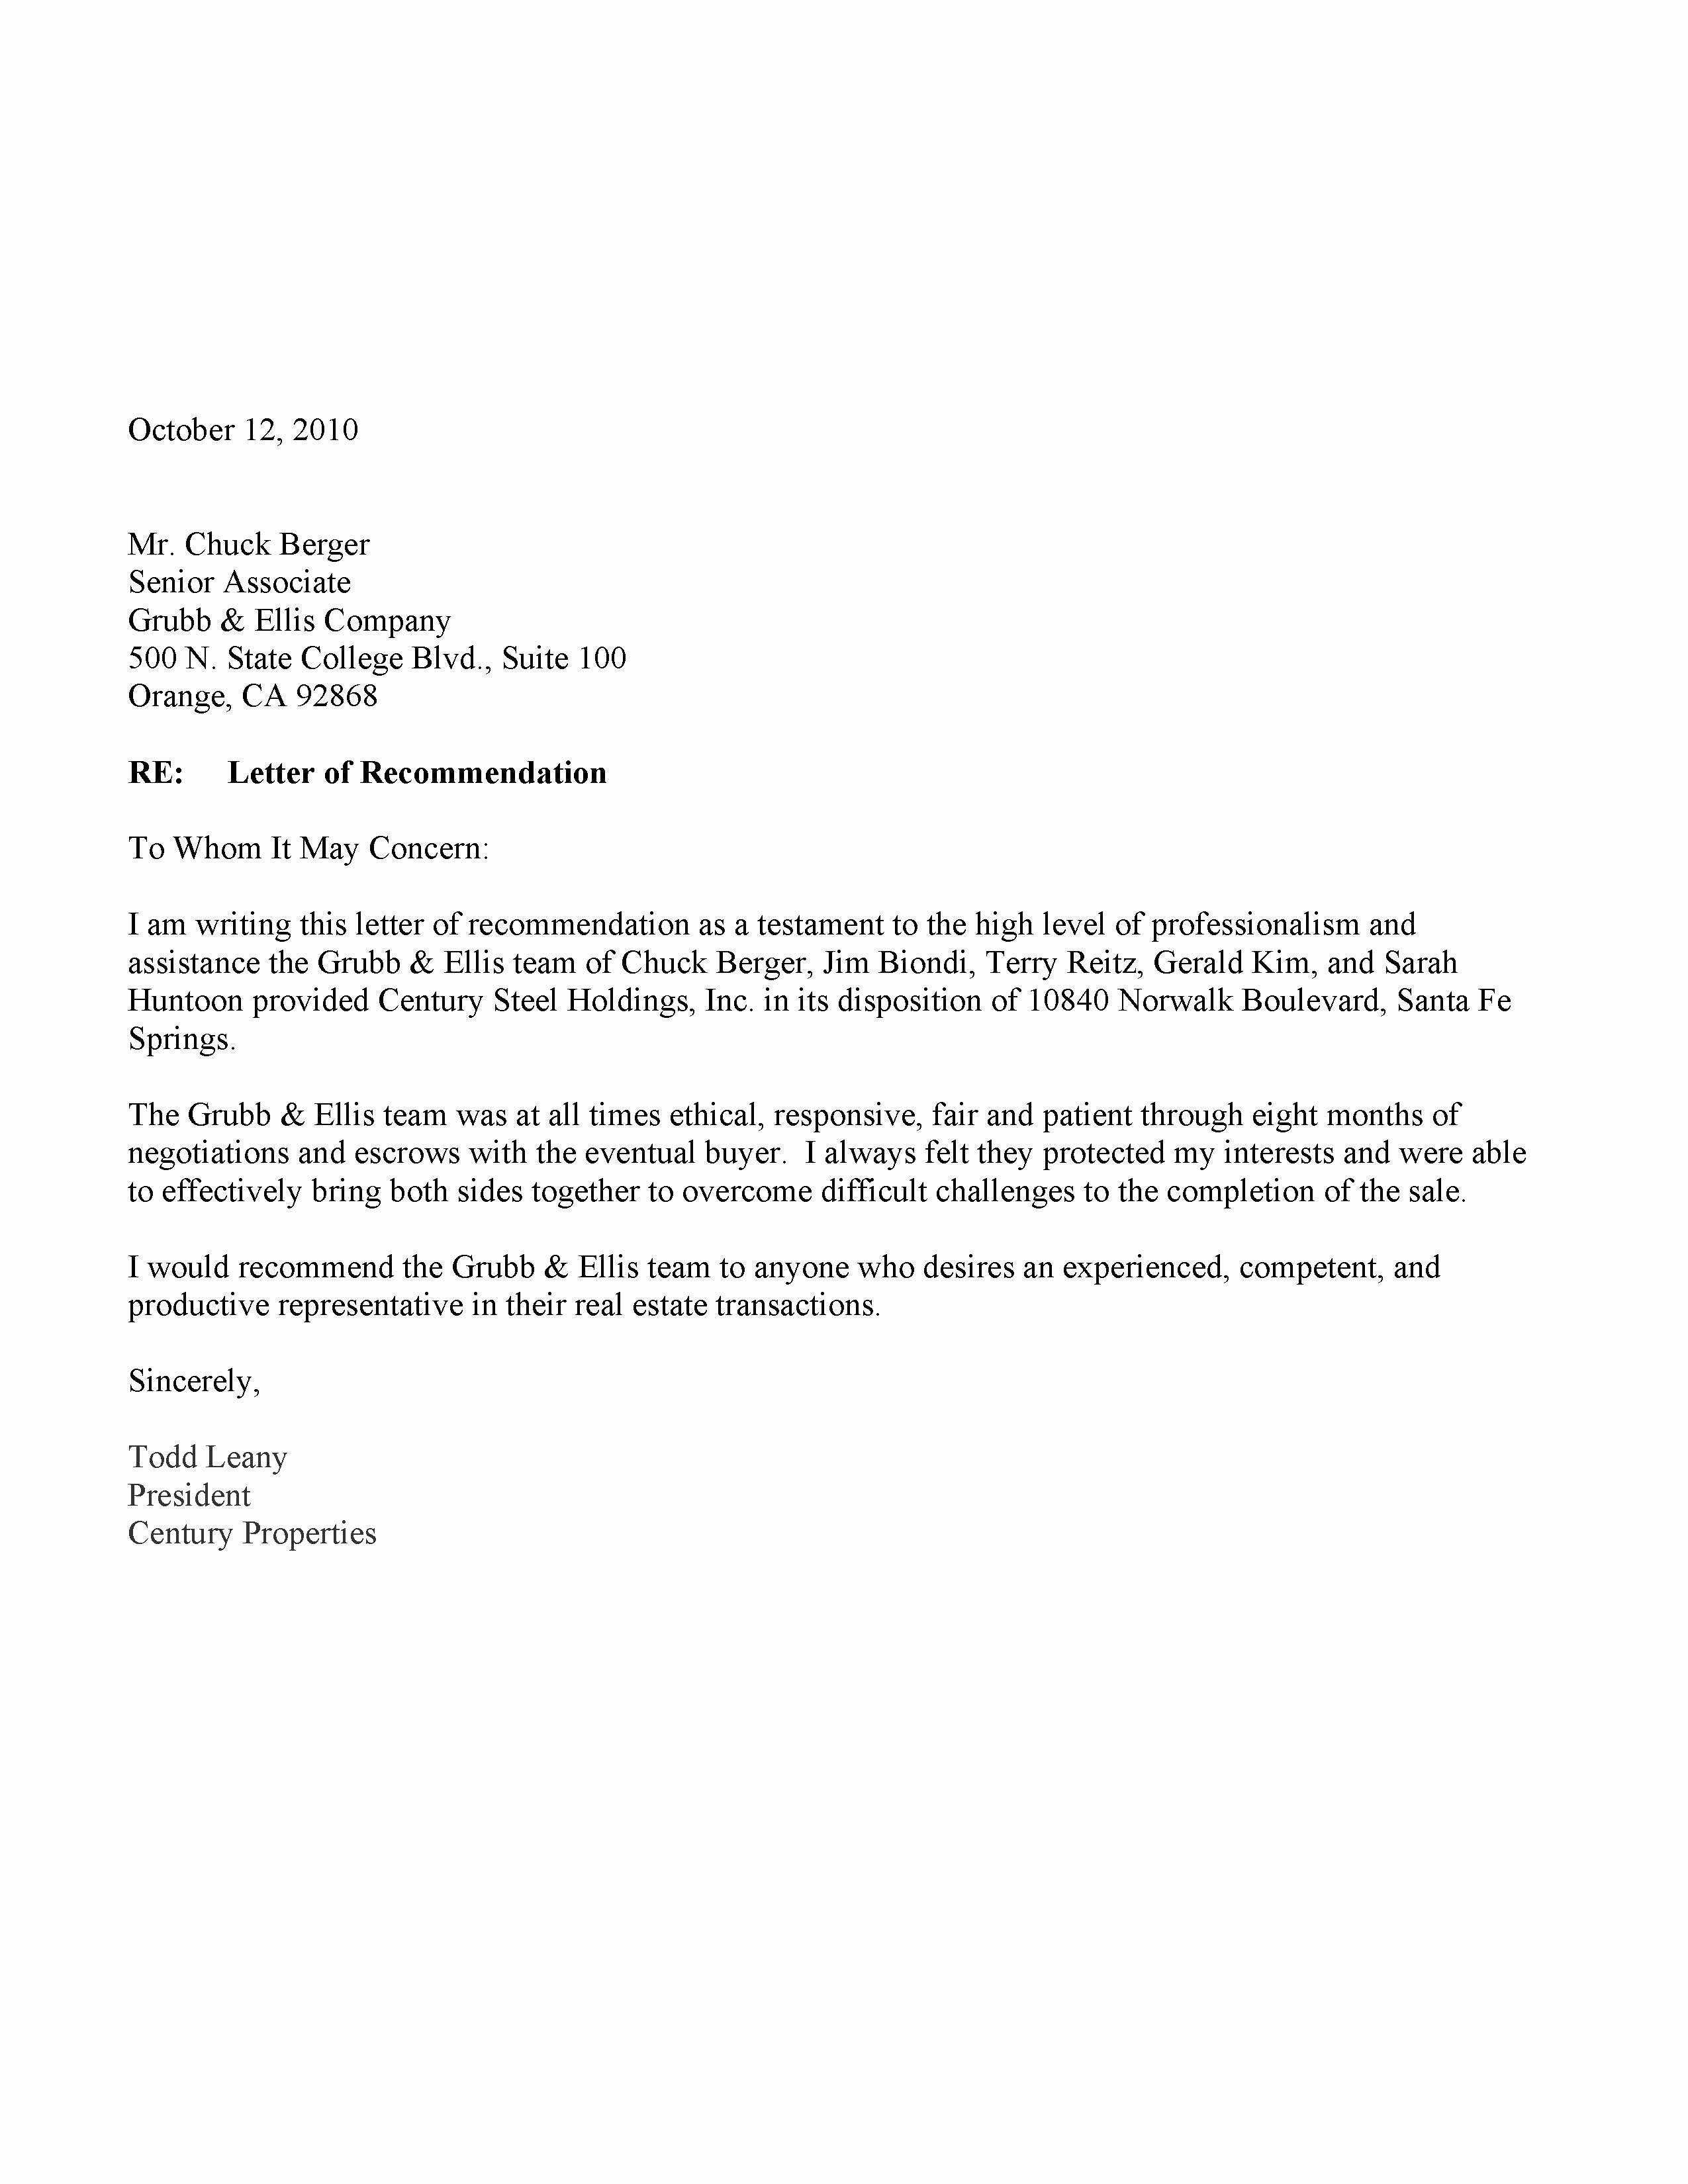 Realtor Recommendation Letter Examples Awesome Letter Of Re Mendation – Grubb and Ellis – Supply Chain